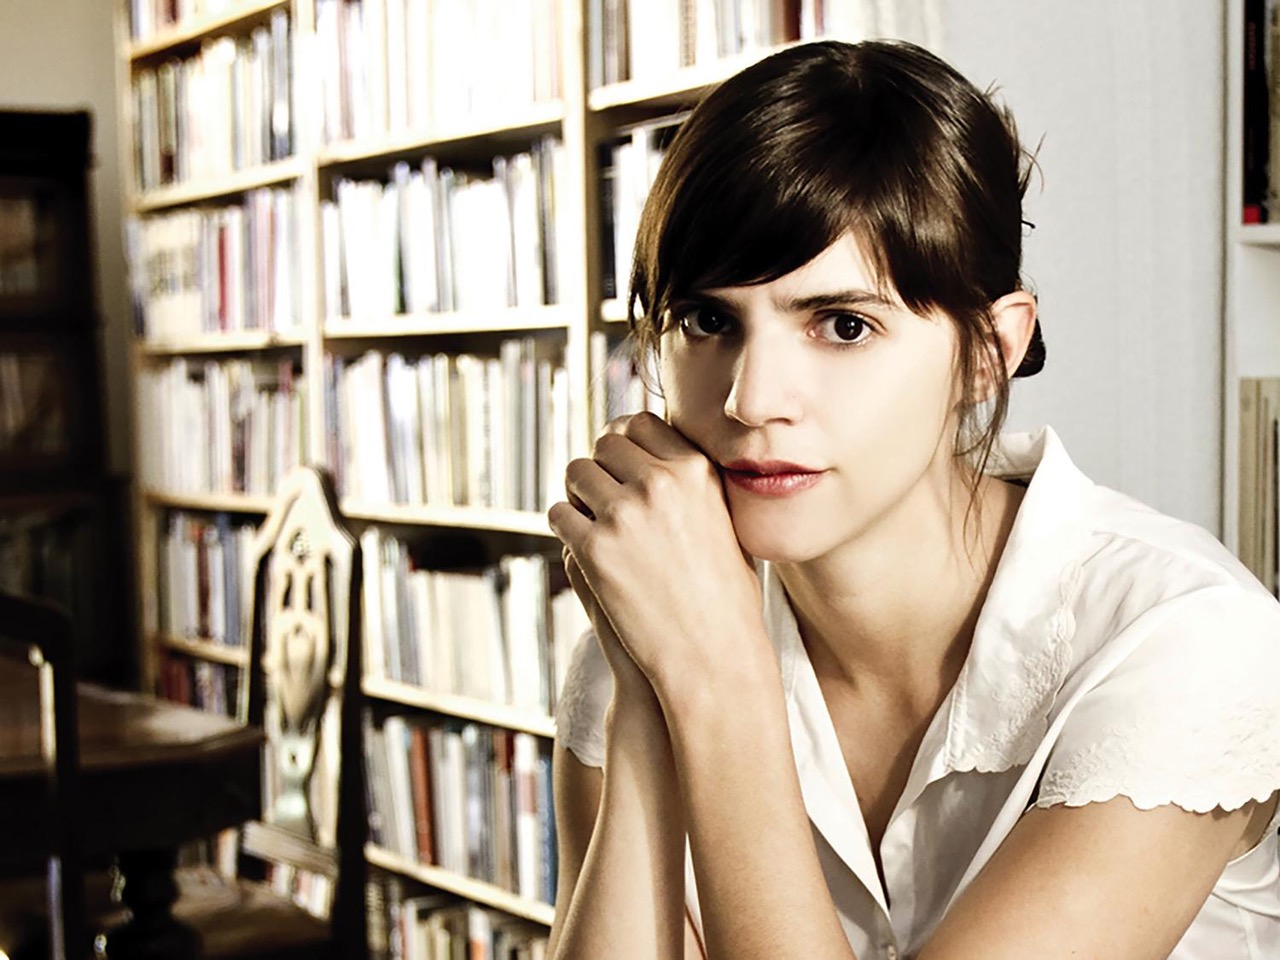 2018 American Book Award&ndash;Winning Author Valeria Luiselli to Read at Bard College, Tuesday, April 23&nbsp;